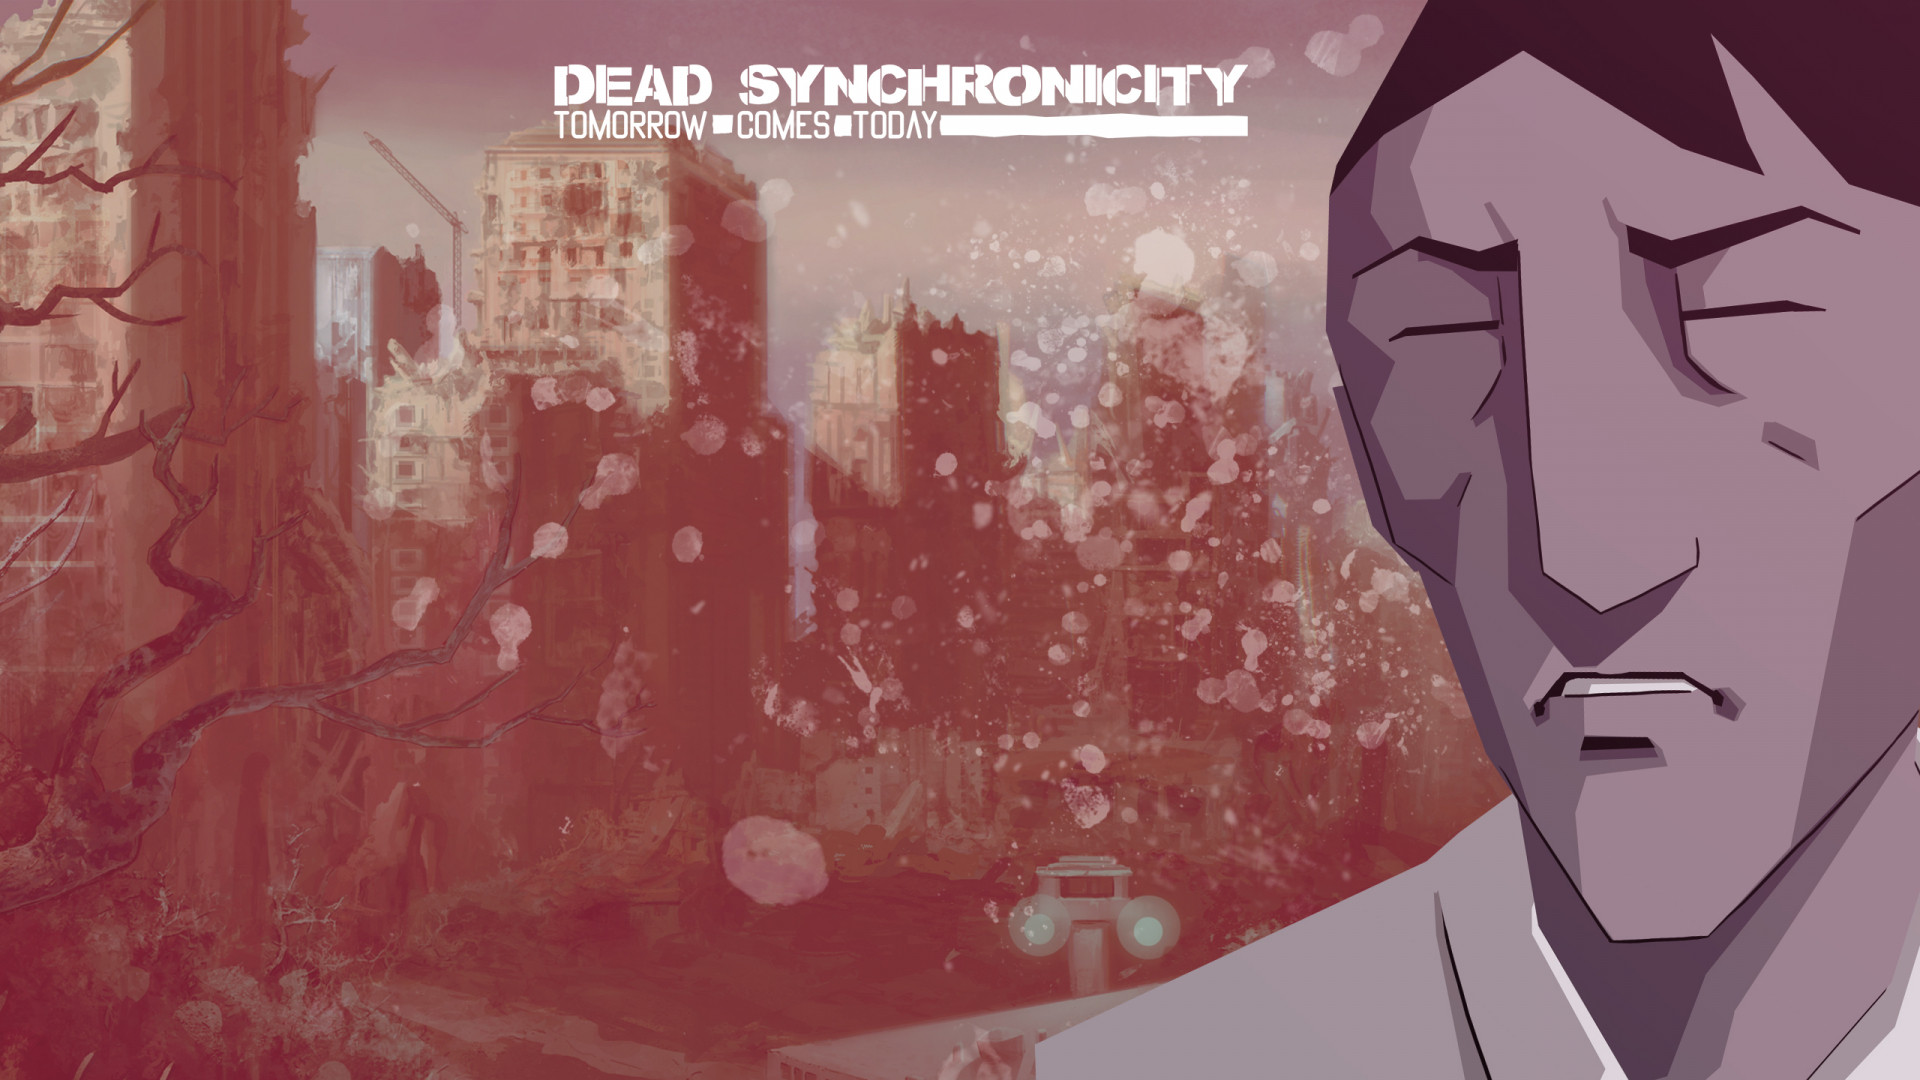 I can come tomorrow. Dead Synchronicity tomorrow comes today ps4.